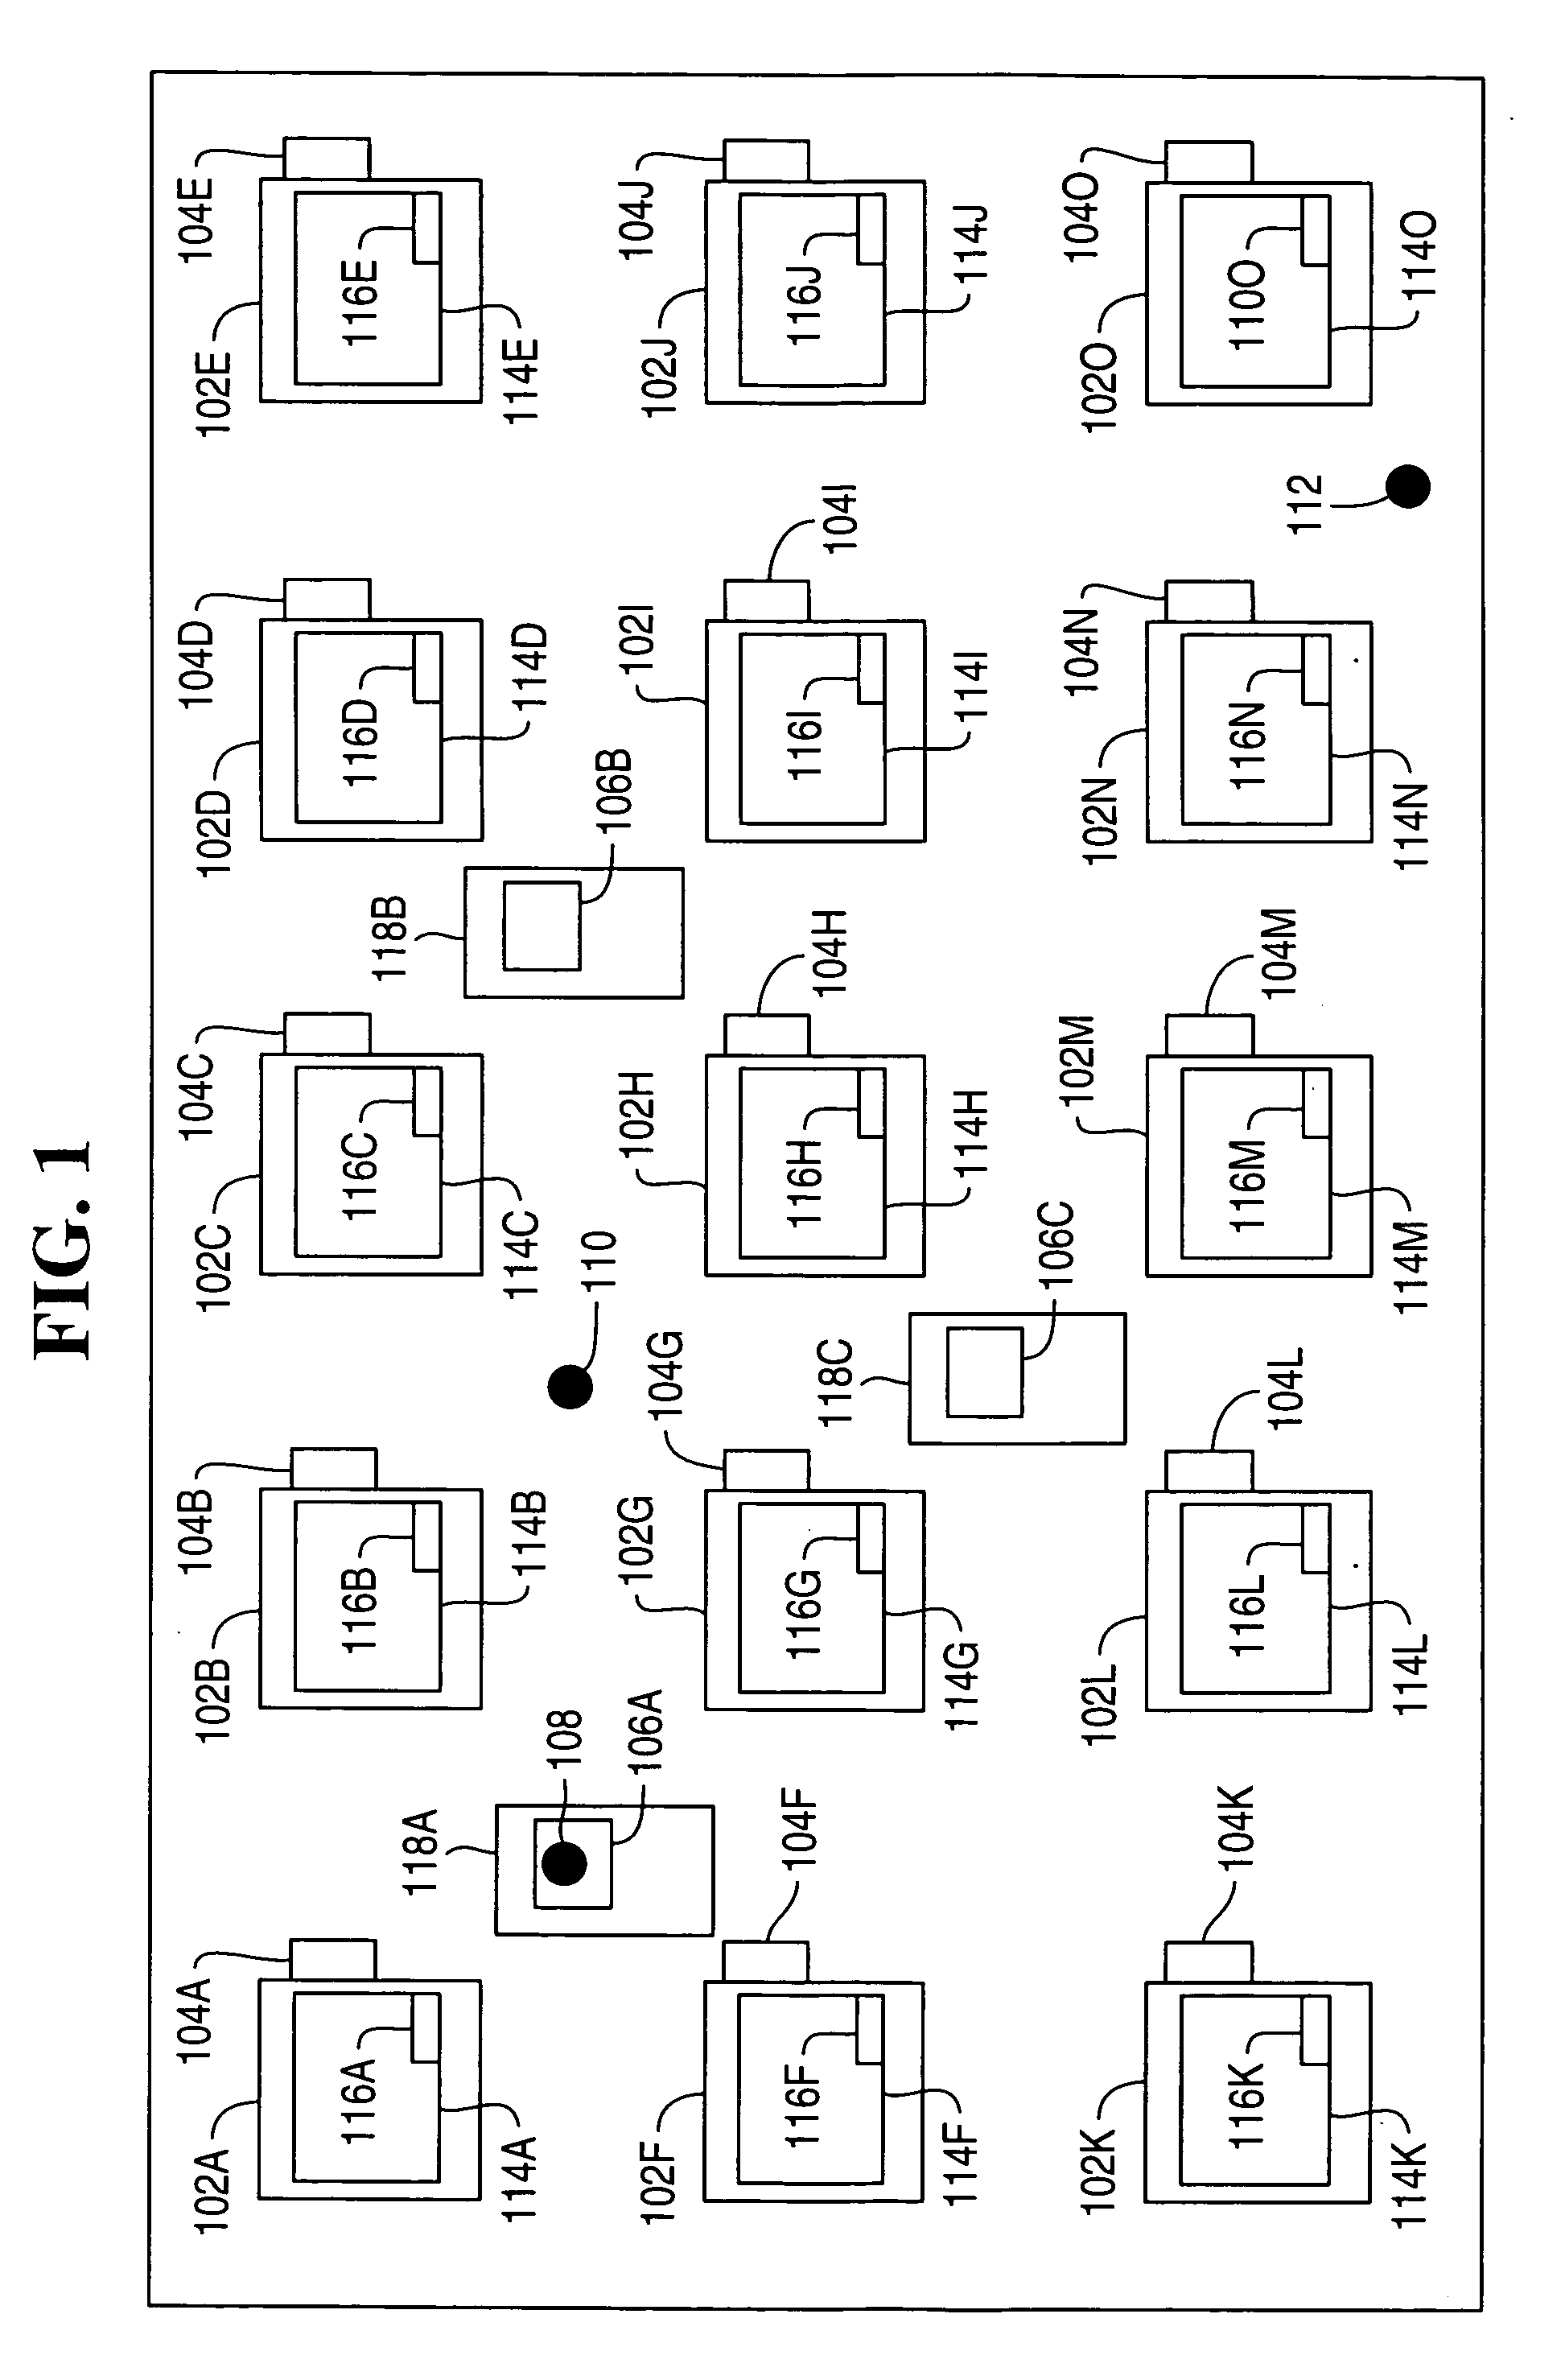 Methods and apparatus for managing location information for movable objects